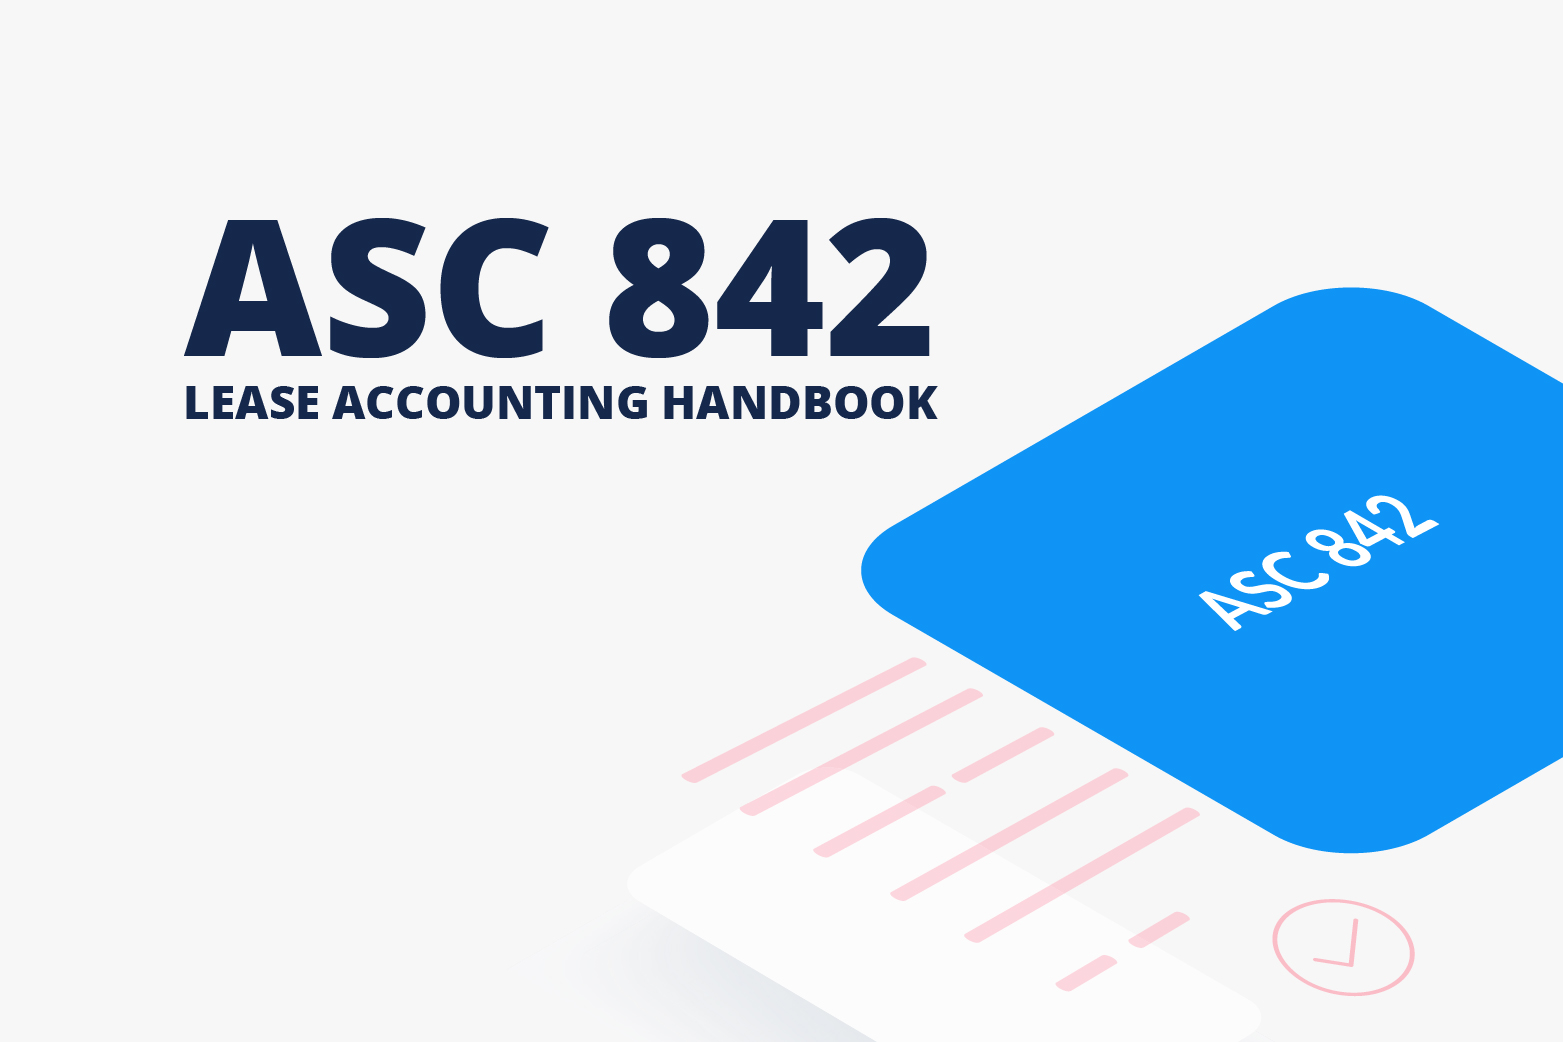 ASC 842 - Lease Accounting Software